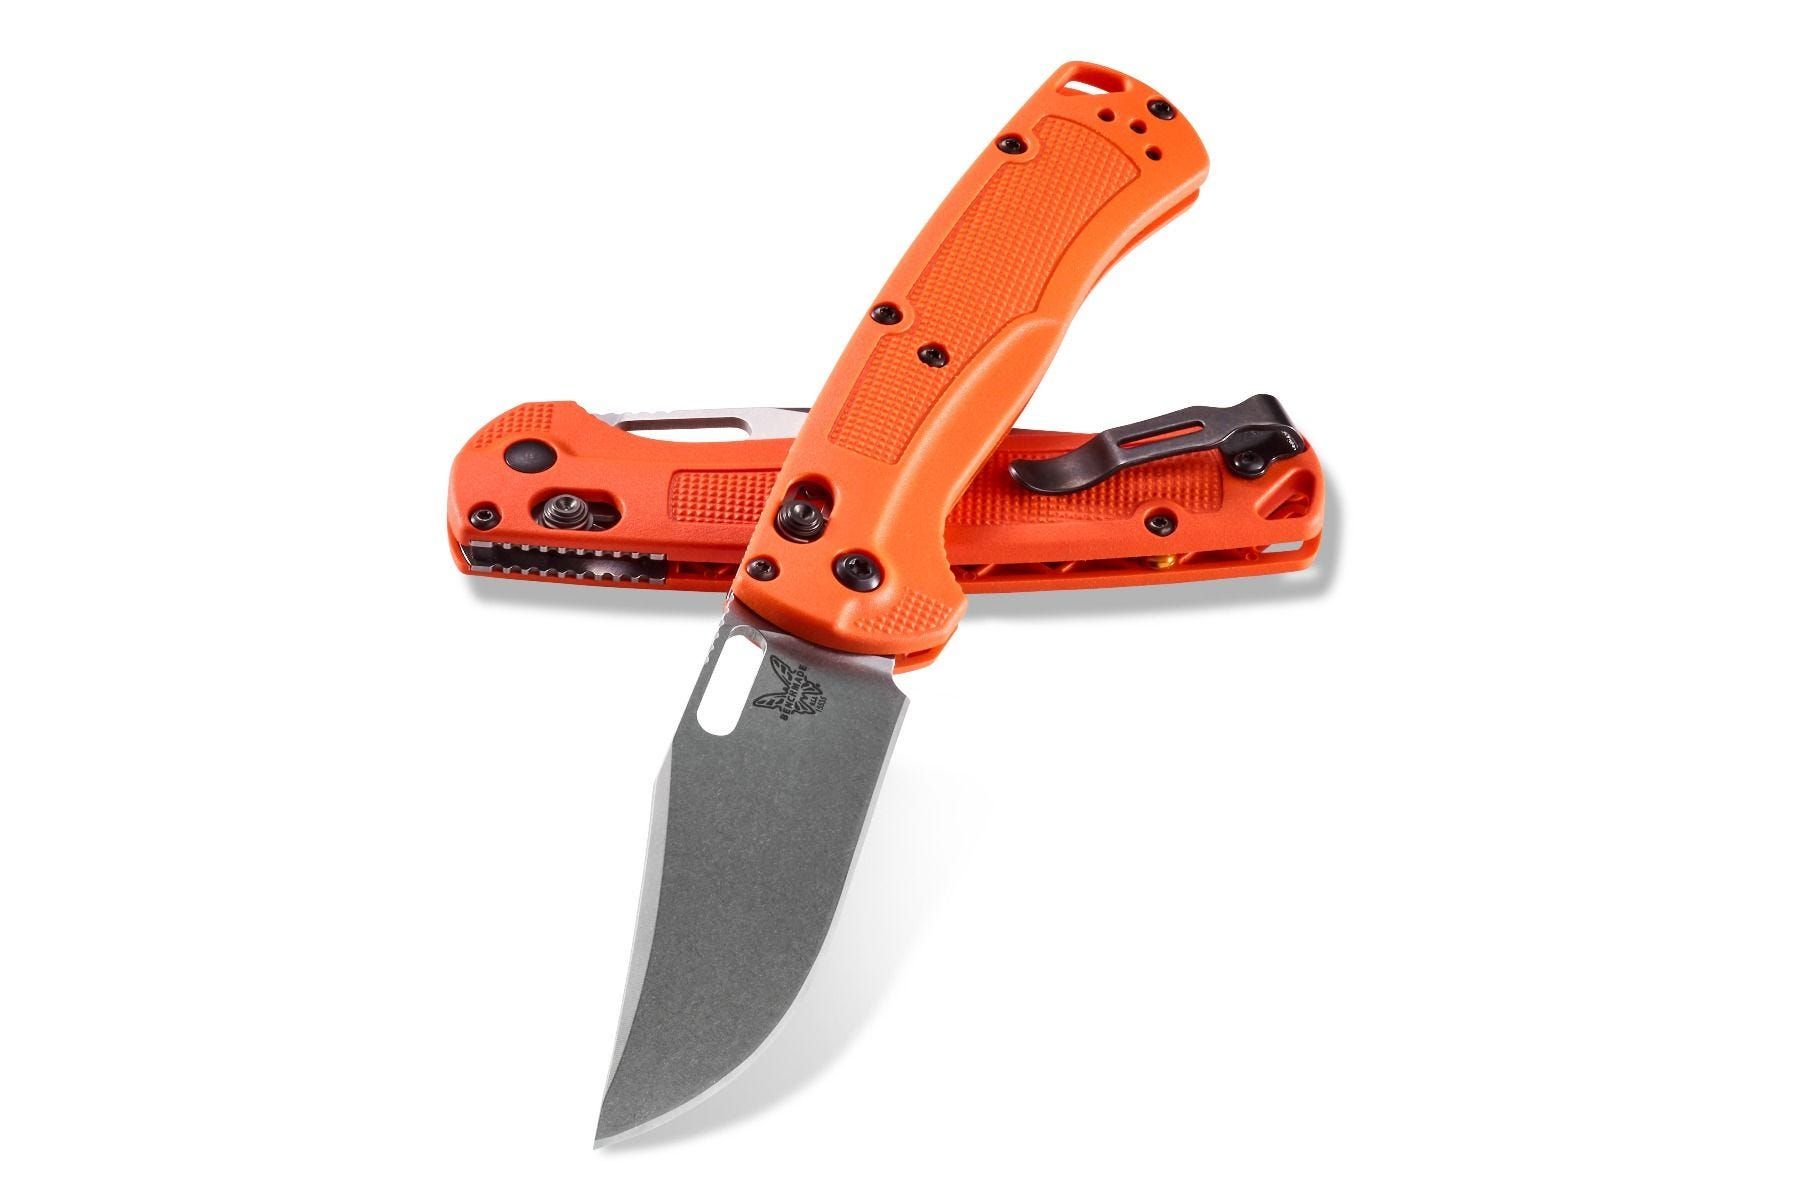 Benchmade Taggedout 15535 Orange Grivory & CPM-154 Stainless